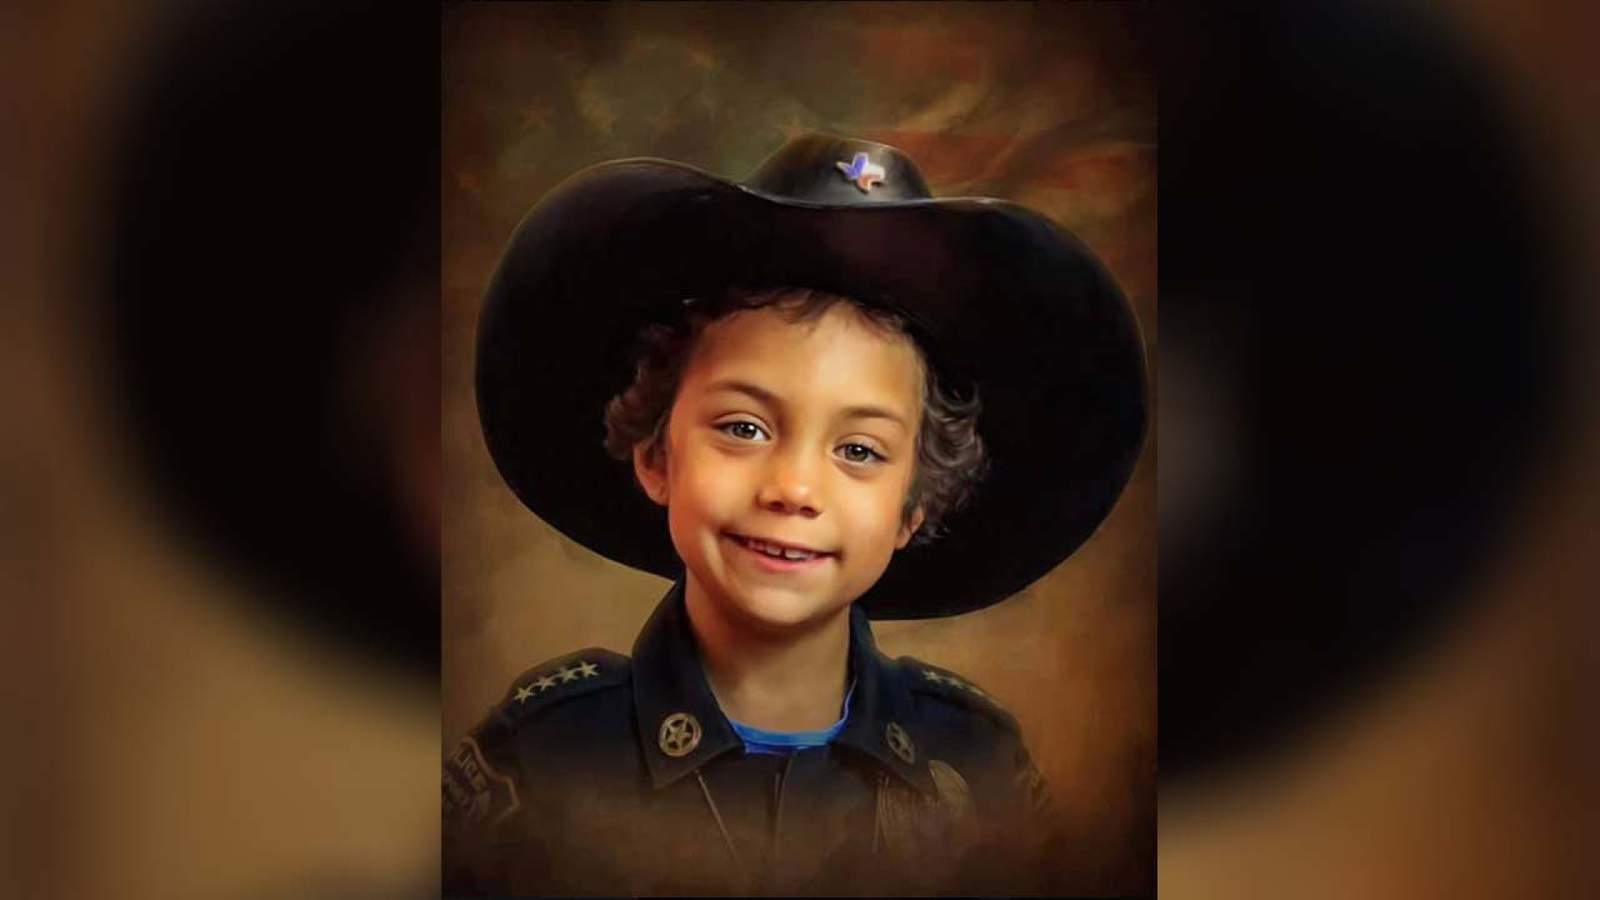 Remembering Officer Abigail: The Freeport girl whose cancer fight inspired the world